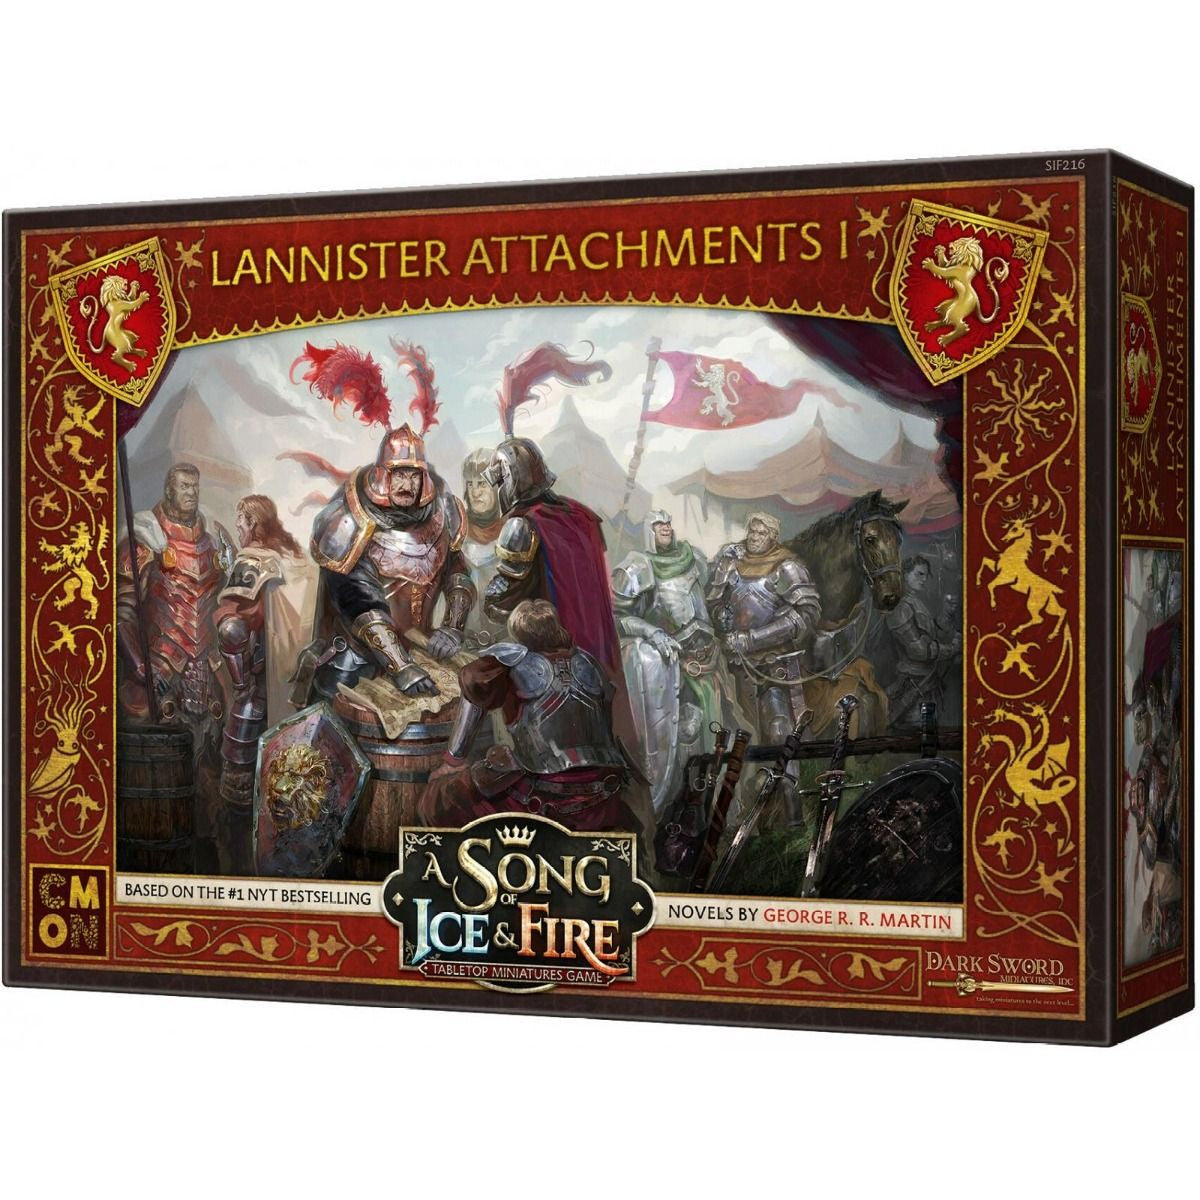 A Song of Ice and Fire: Lannister Attachments #1